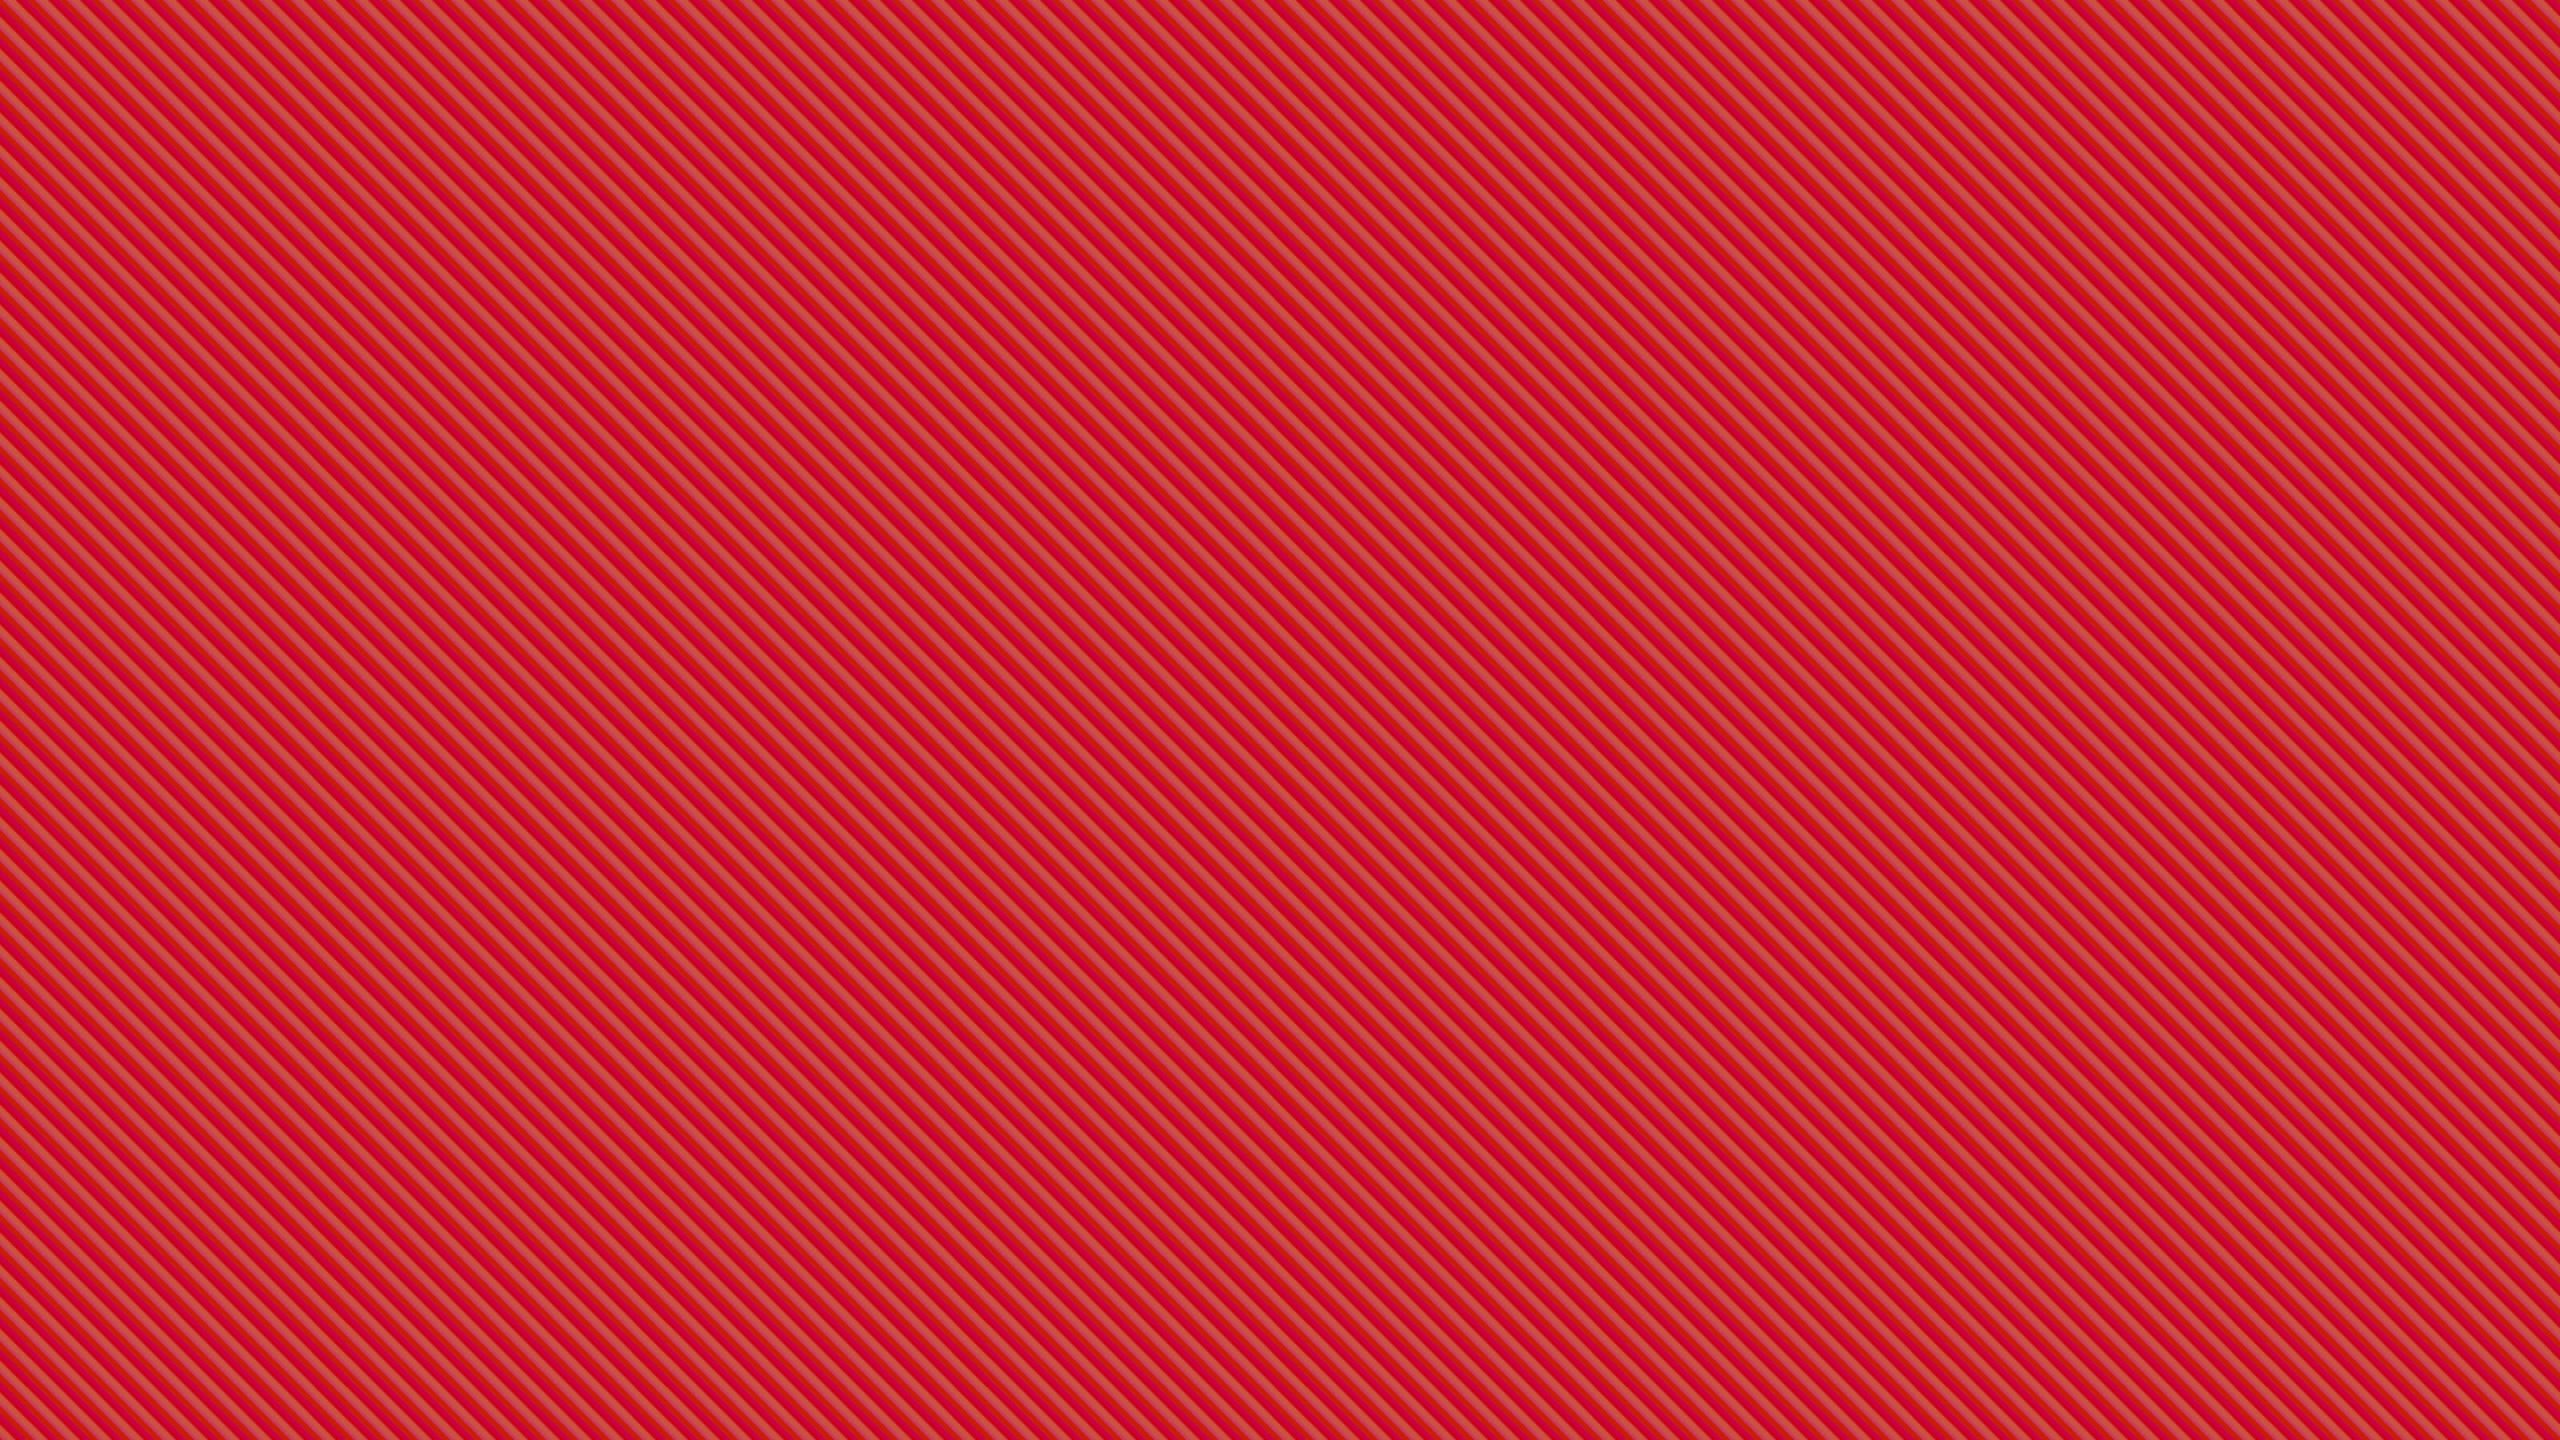 Textile Rayé Rouge et Blanc. Wallpaper in 2560x1440 Resolution